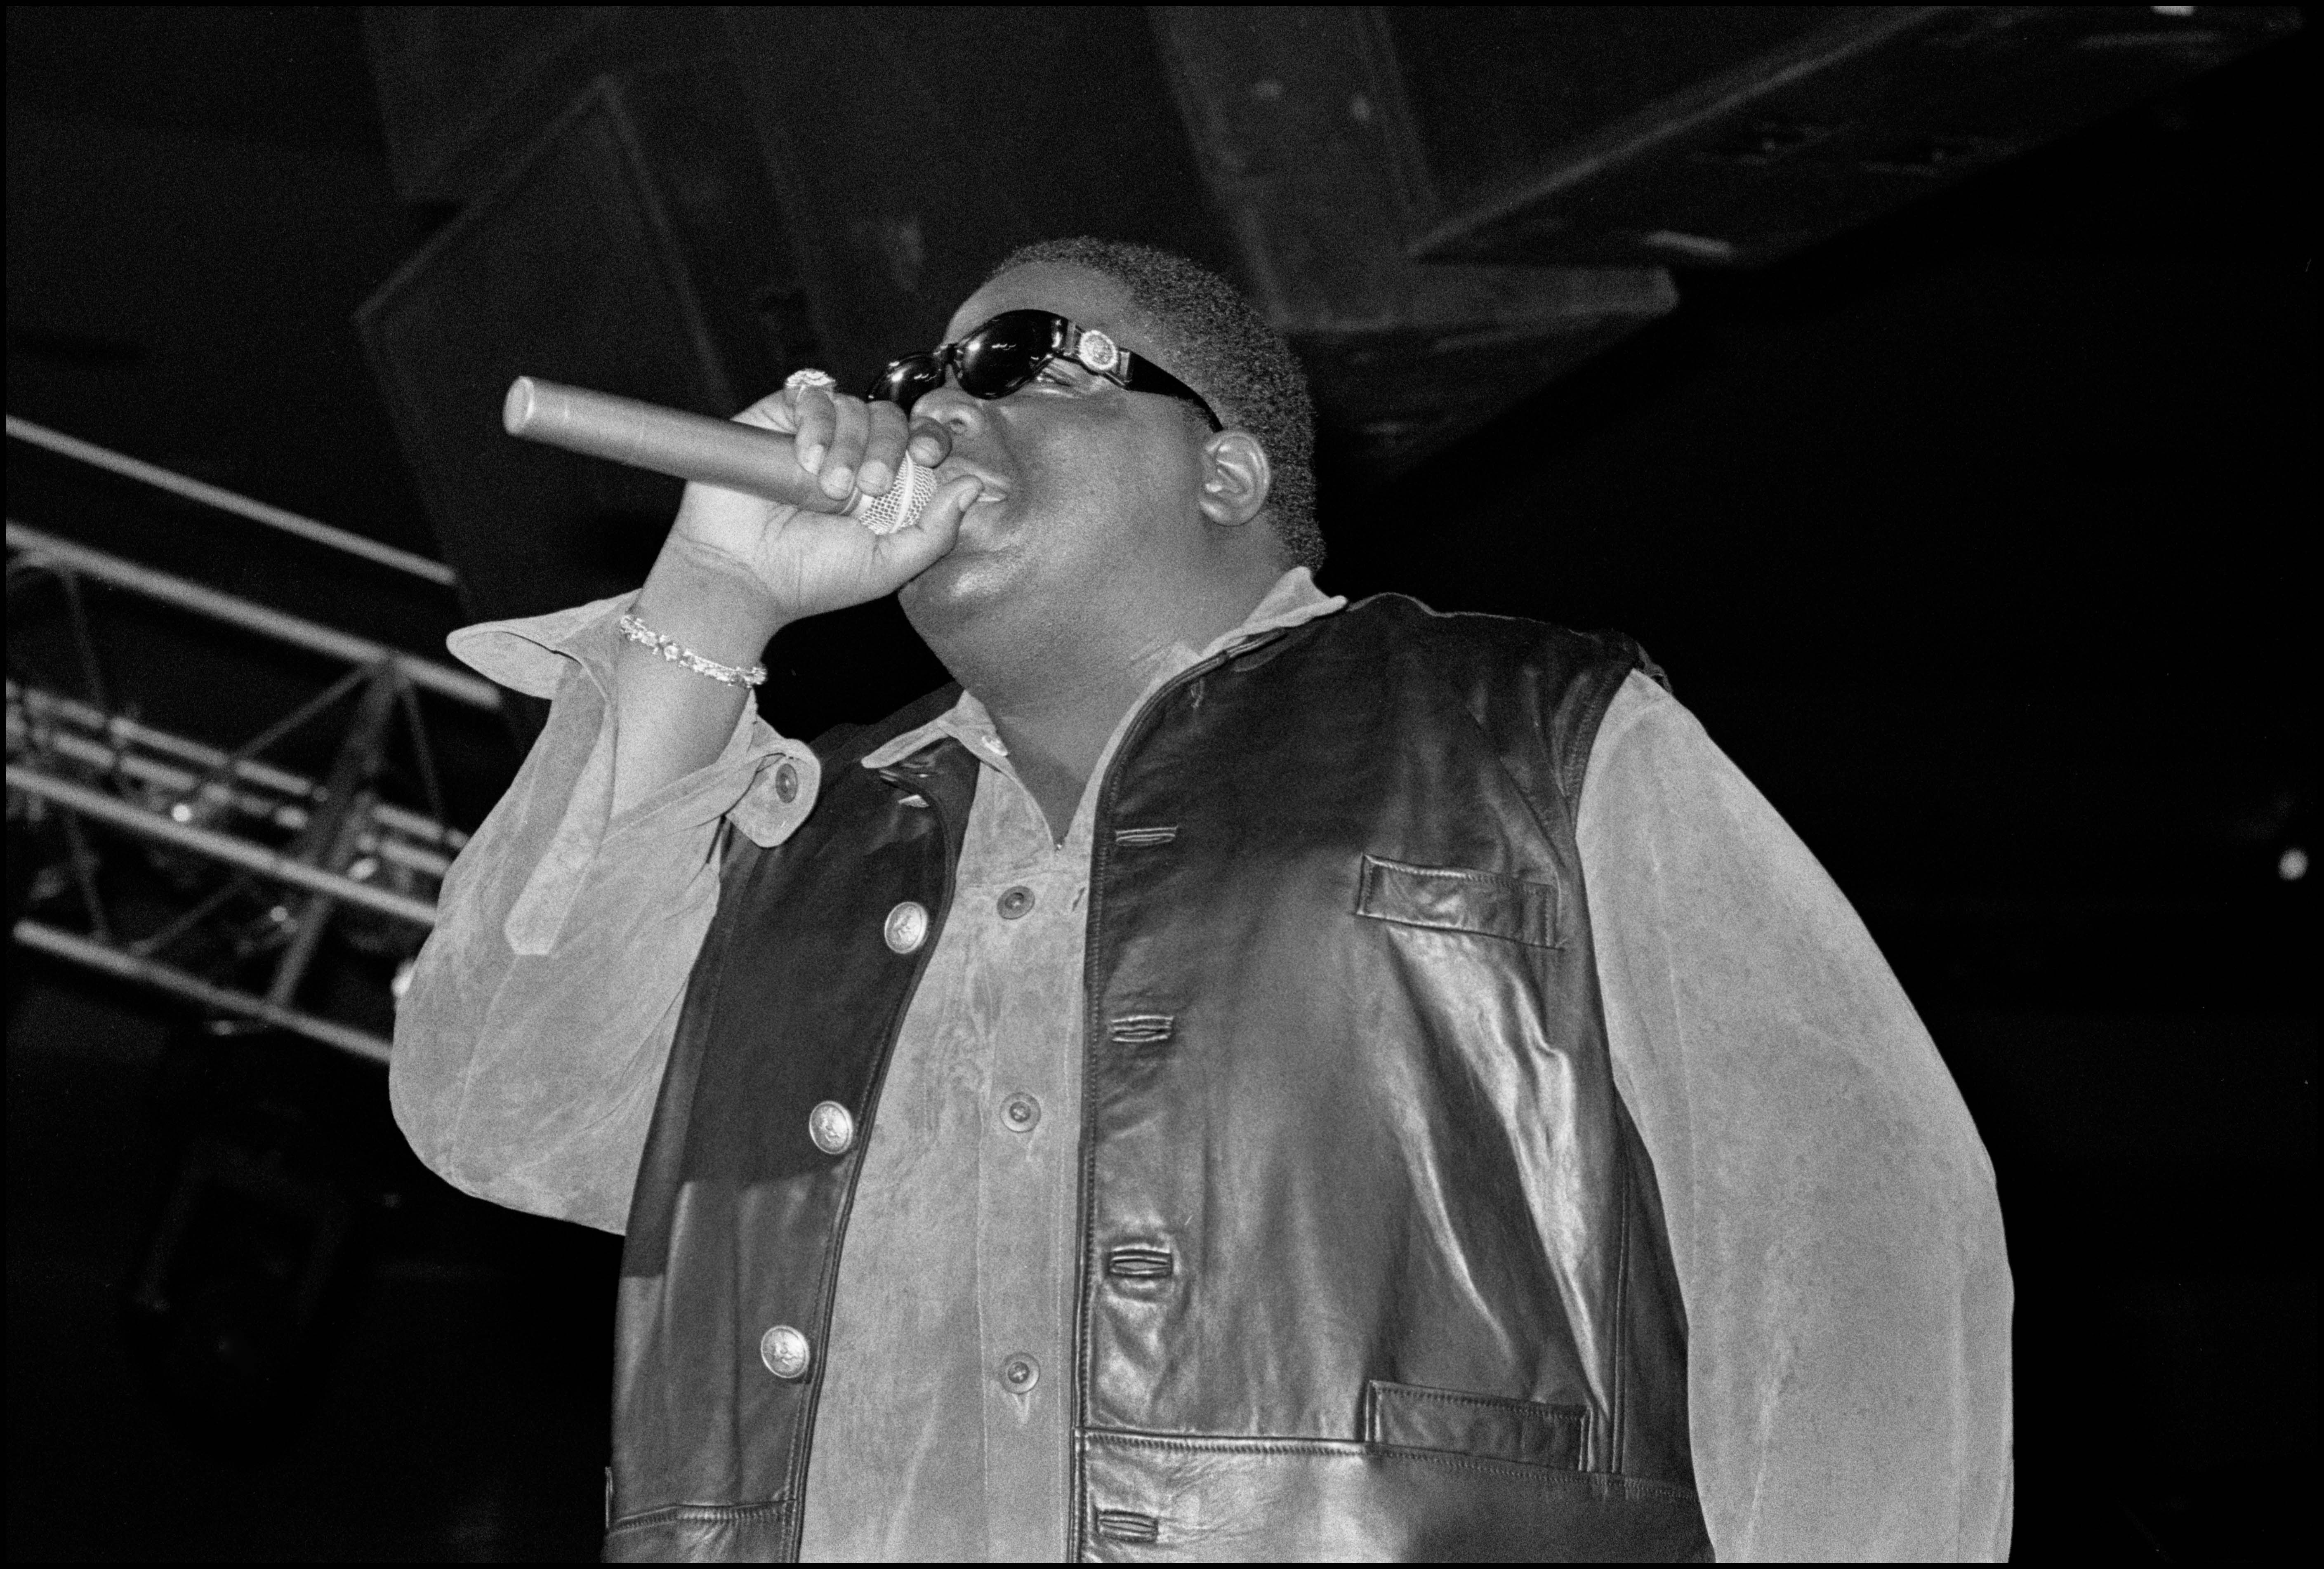 The Notorious B.I.G. performing in a leather jacket